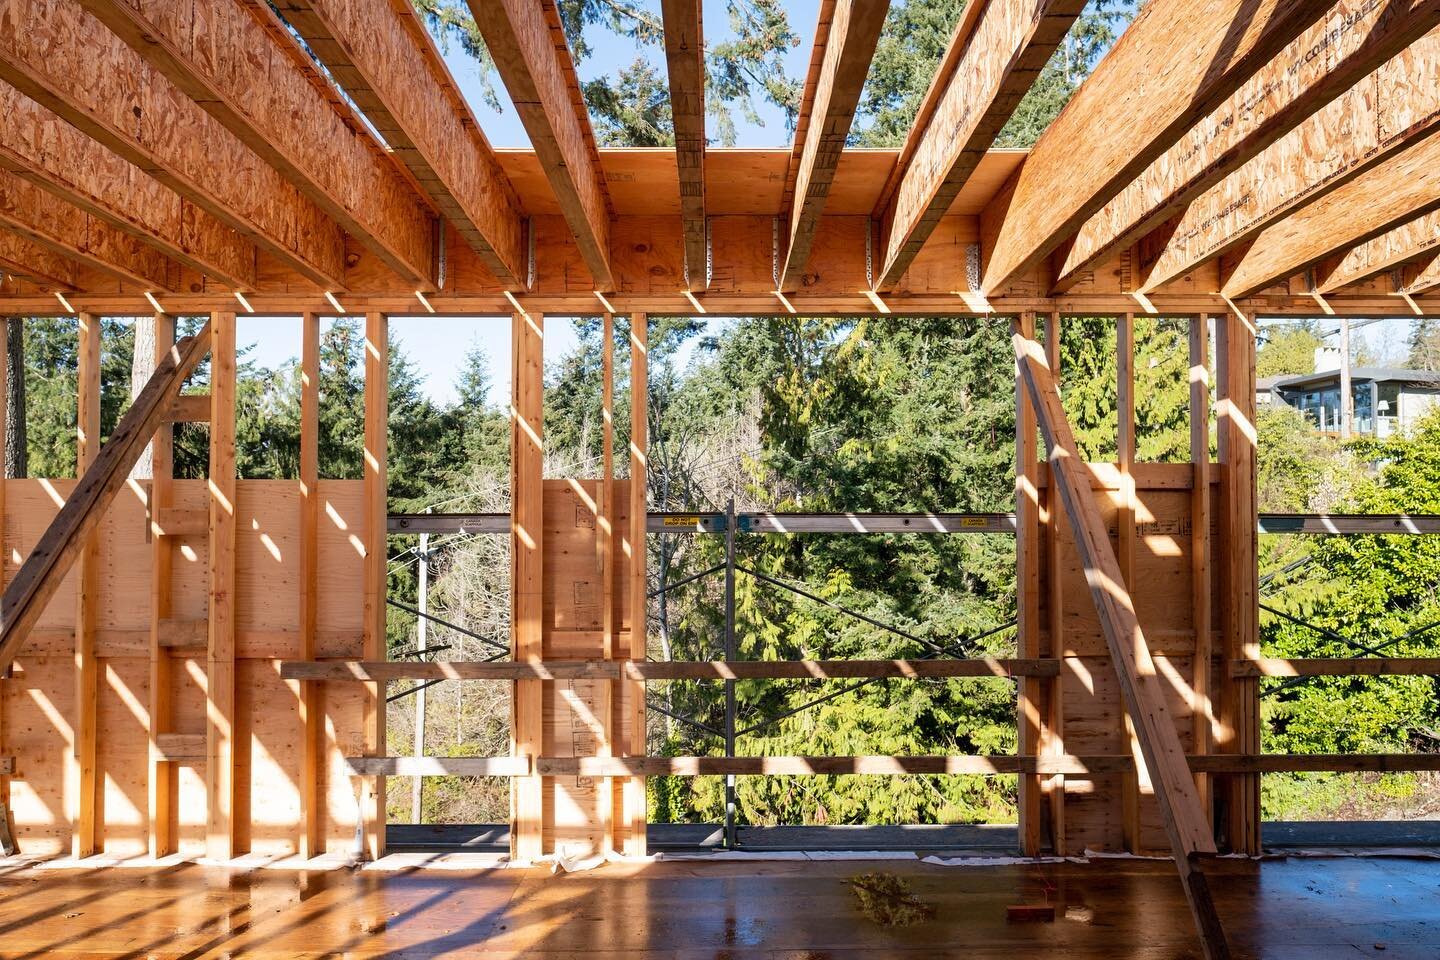 Shape and space emerging in West Bay as the framing of our Courtyard House is handled by the skilled team @BradnerHomes

#westvancouver #westvancouverhomes #westvan